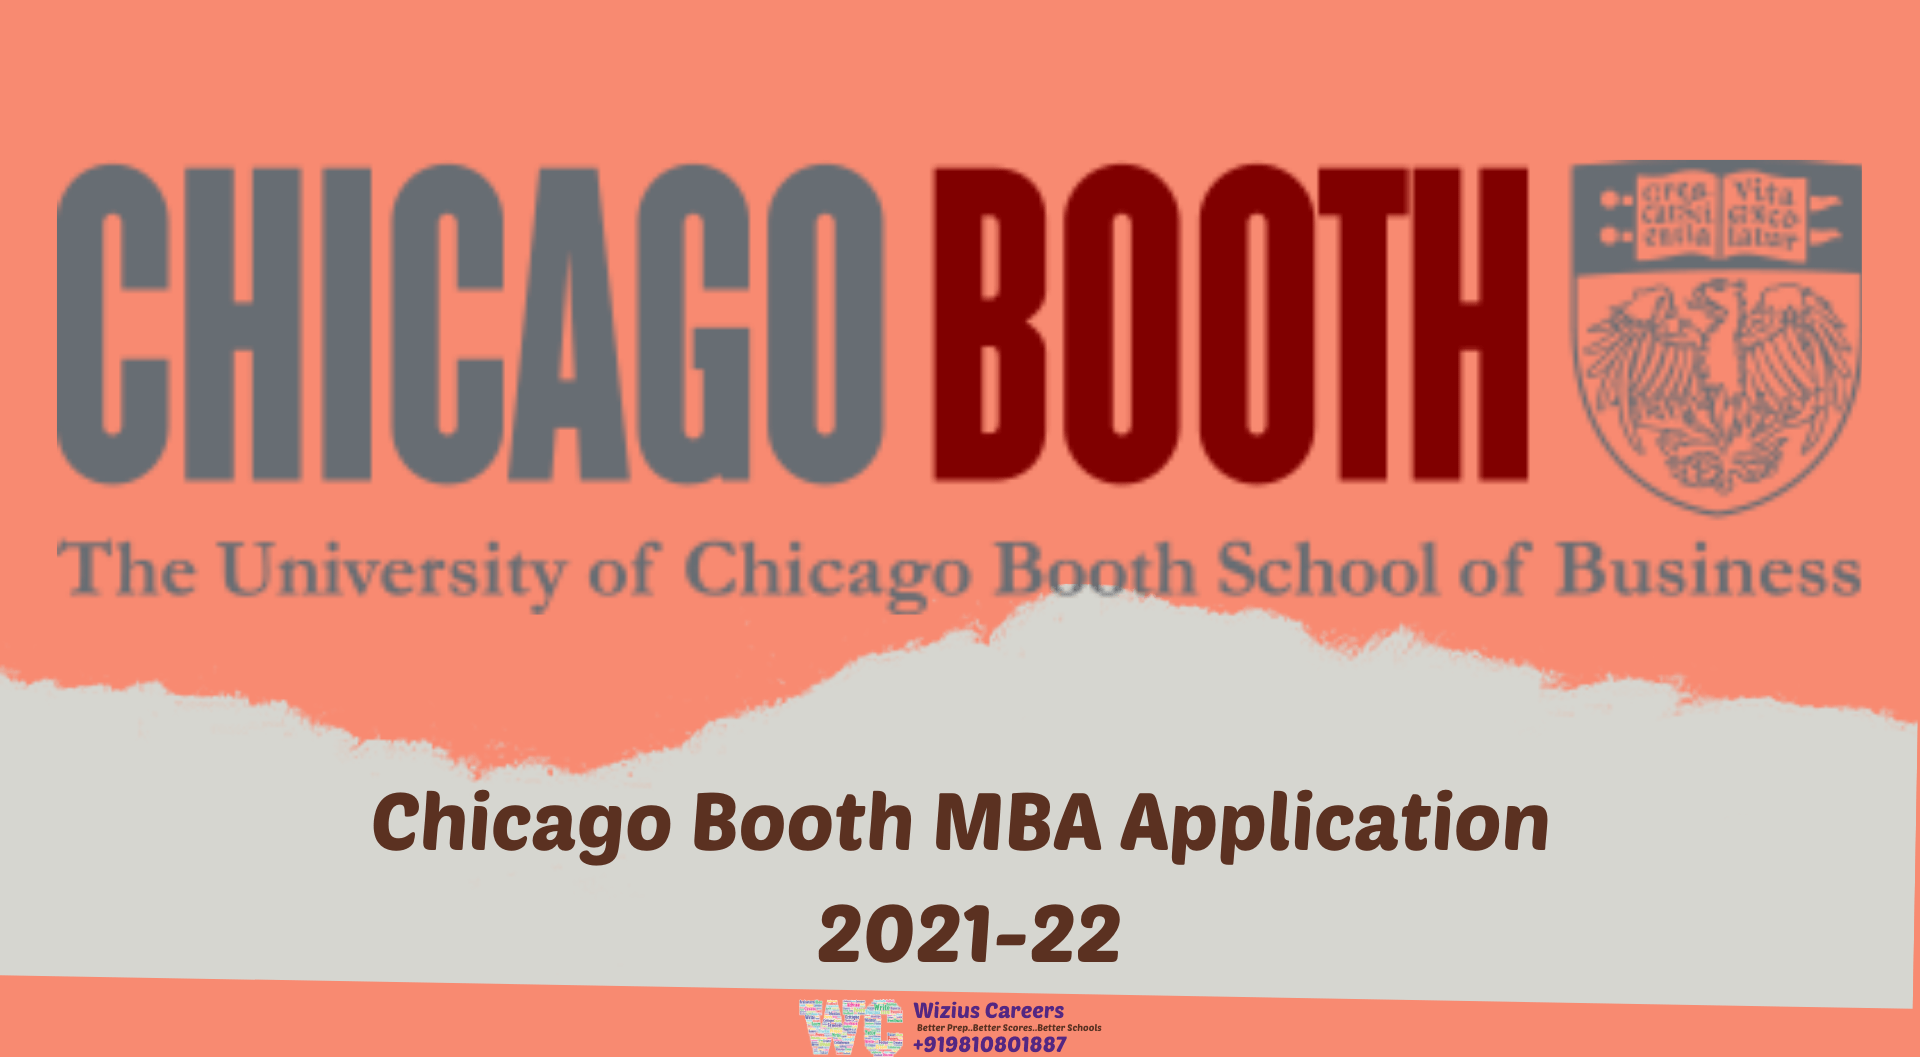 Chicago Booth – MBA Application 2021-22